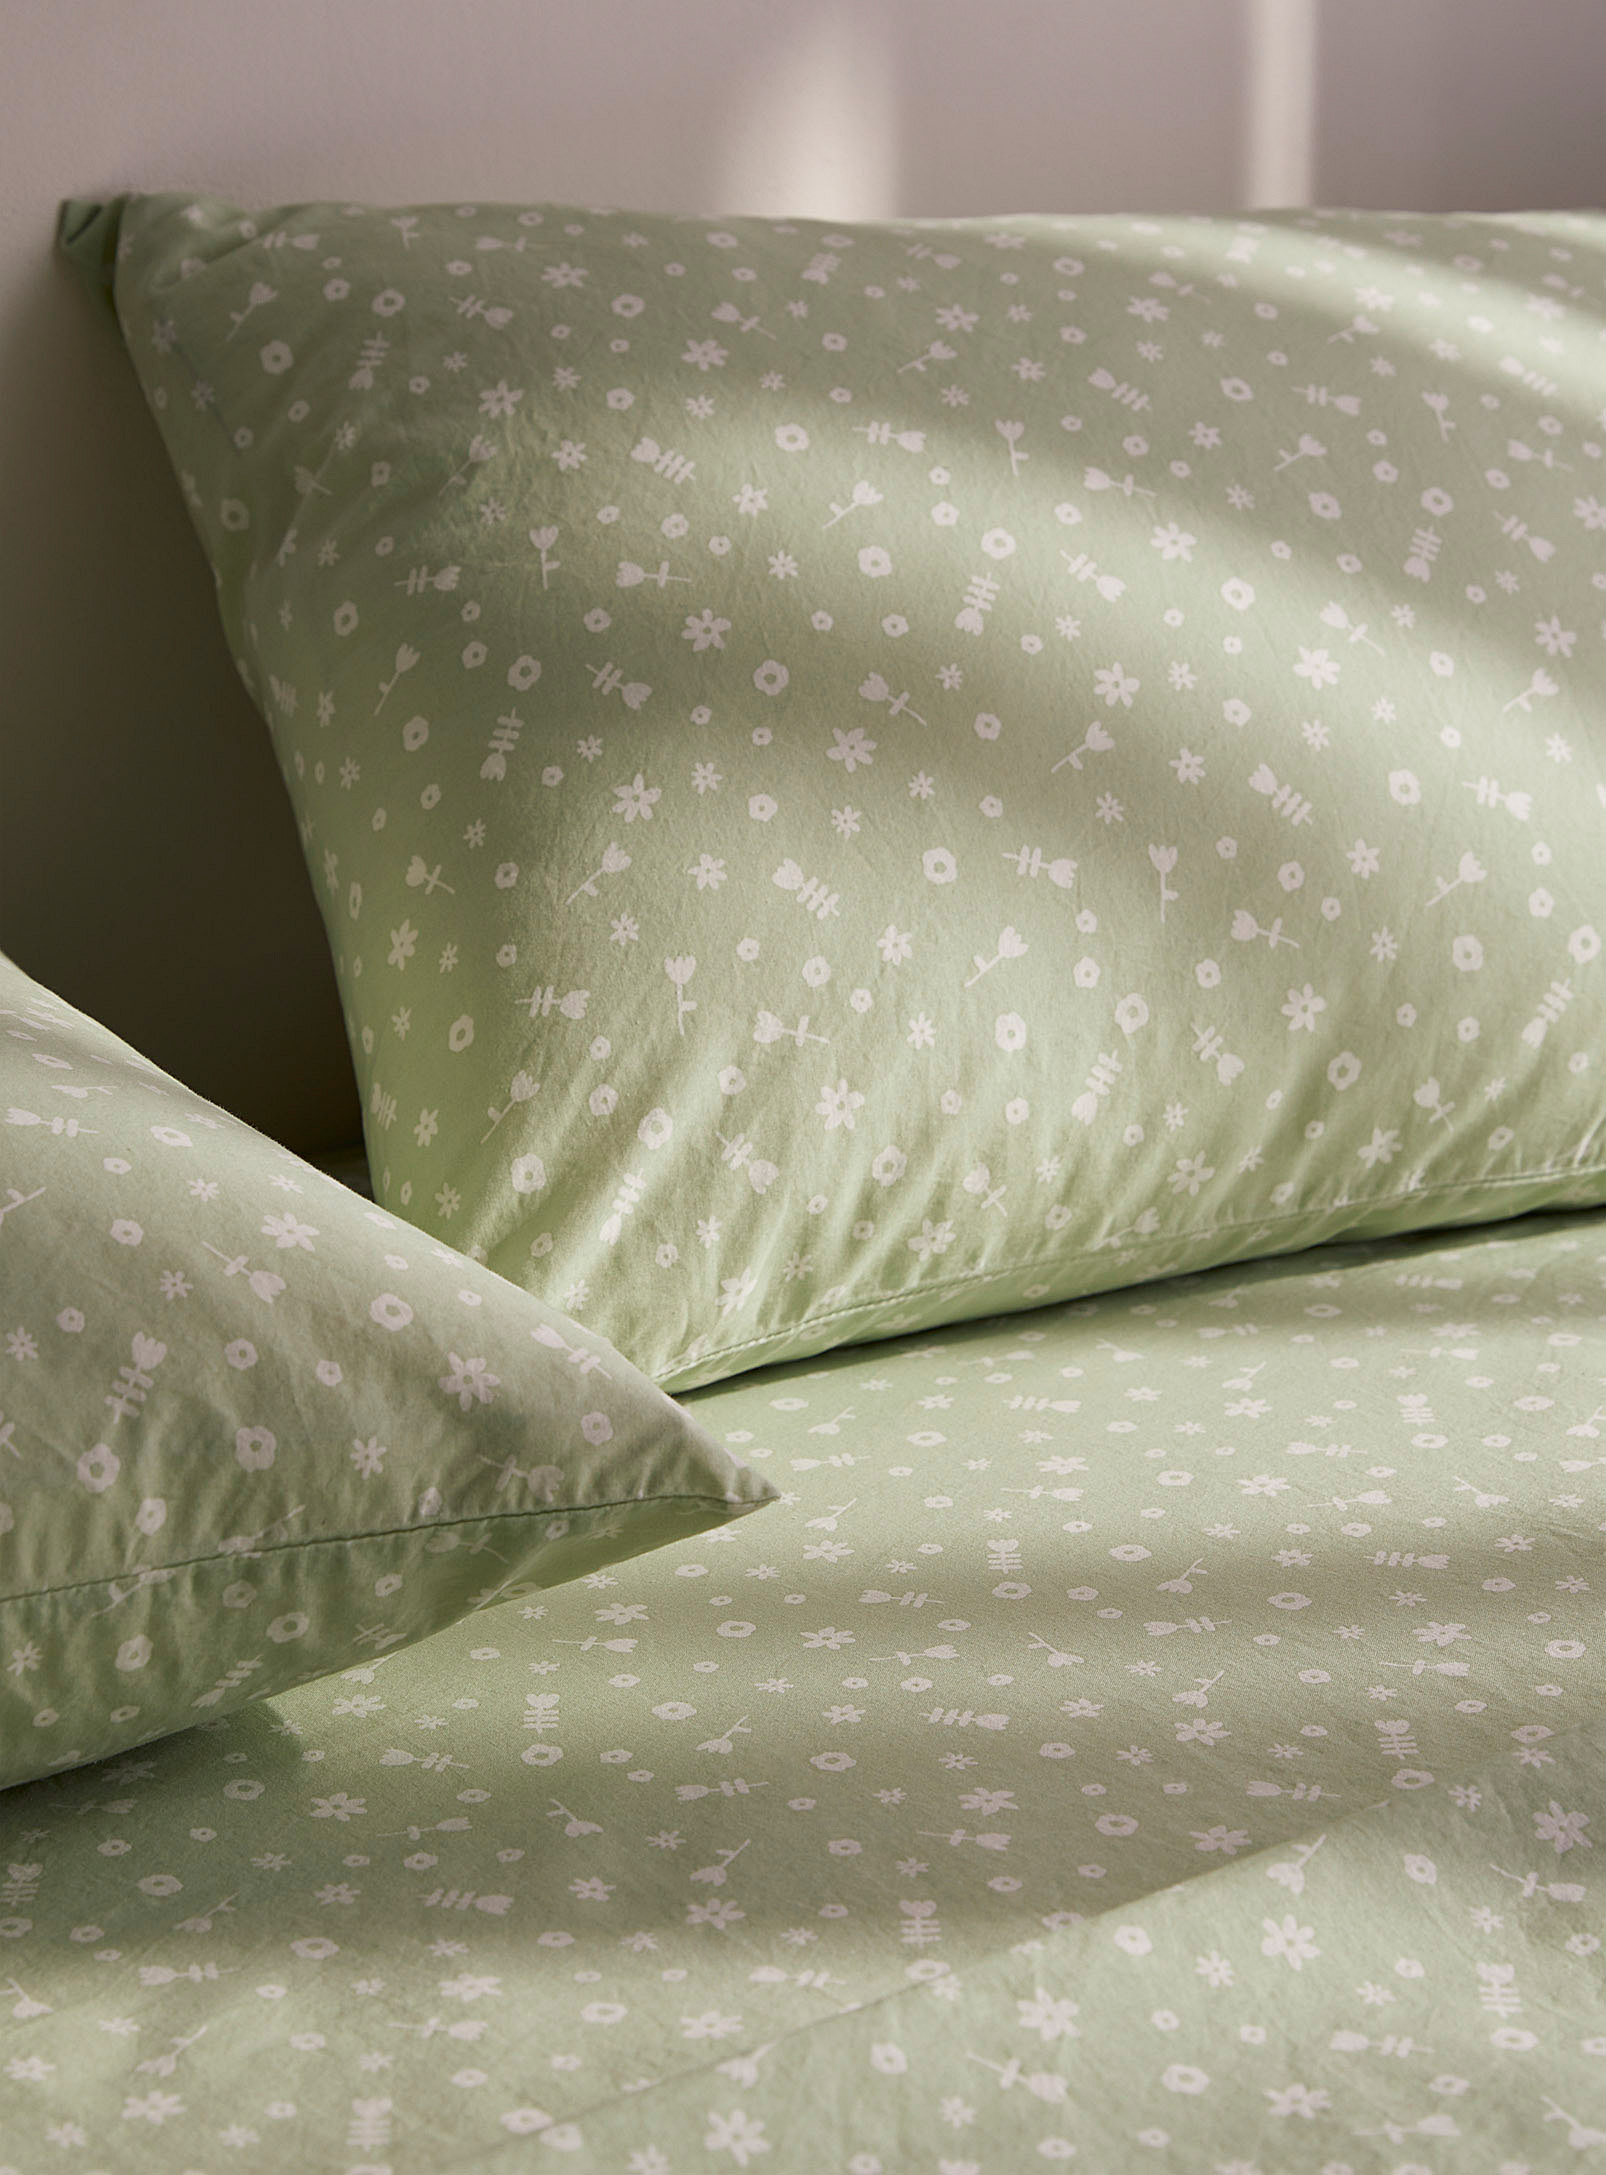 Simons Maison White Flowers Organic Cotton Bedsheet Set Fits Mattresses Up To 16 In In Patterned Green